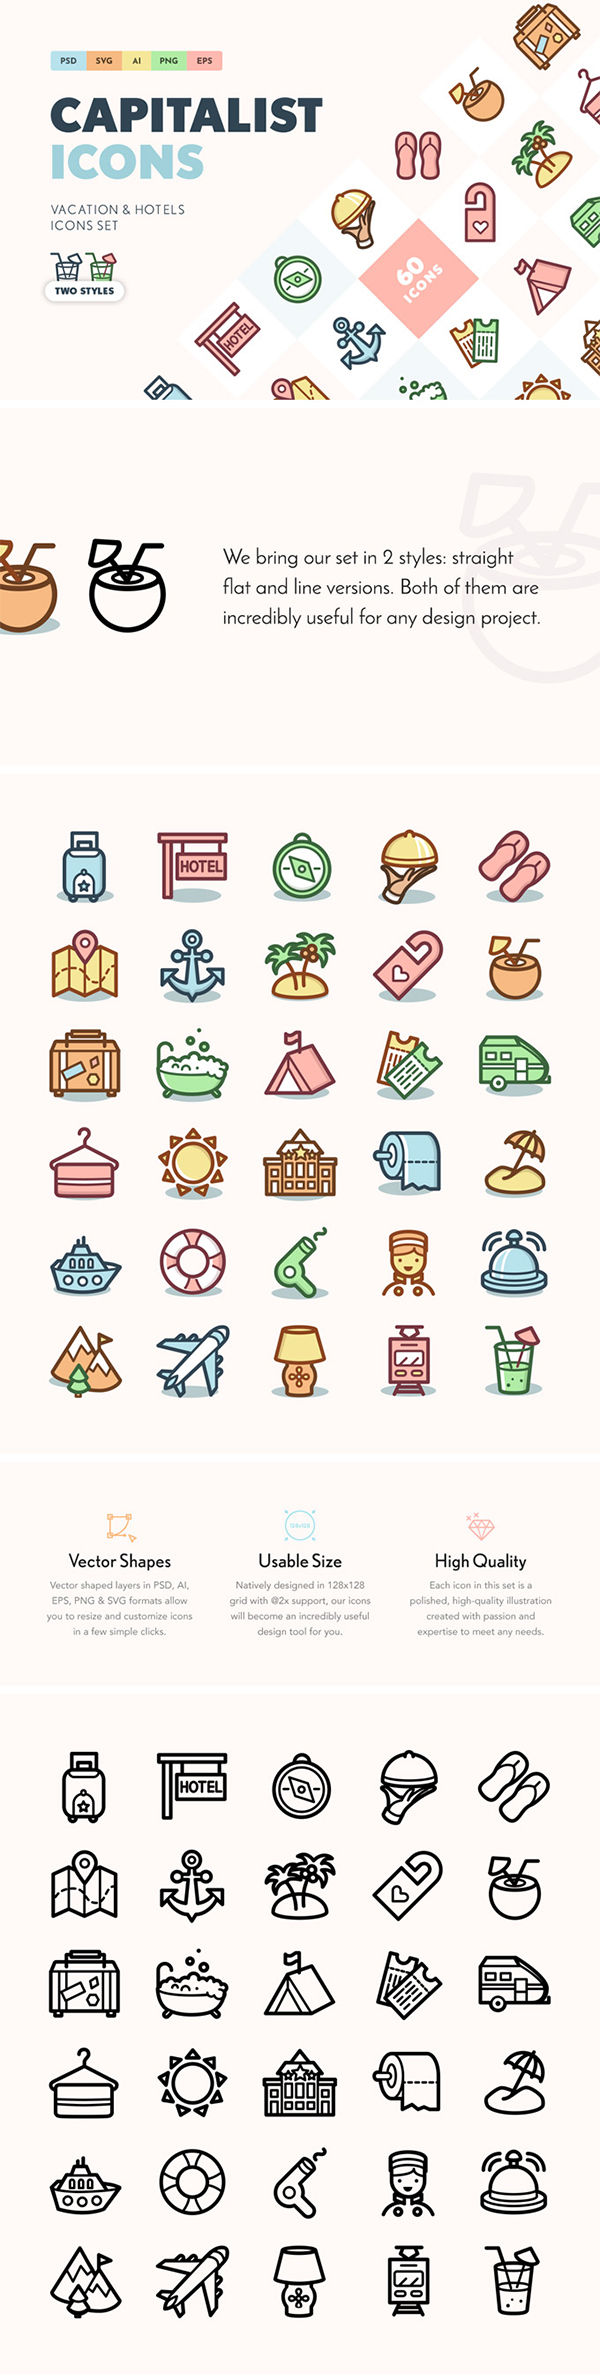 Capitalist Vacation & Hotels Icons